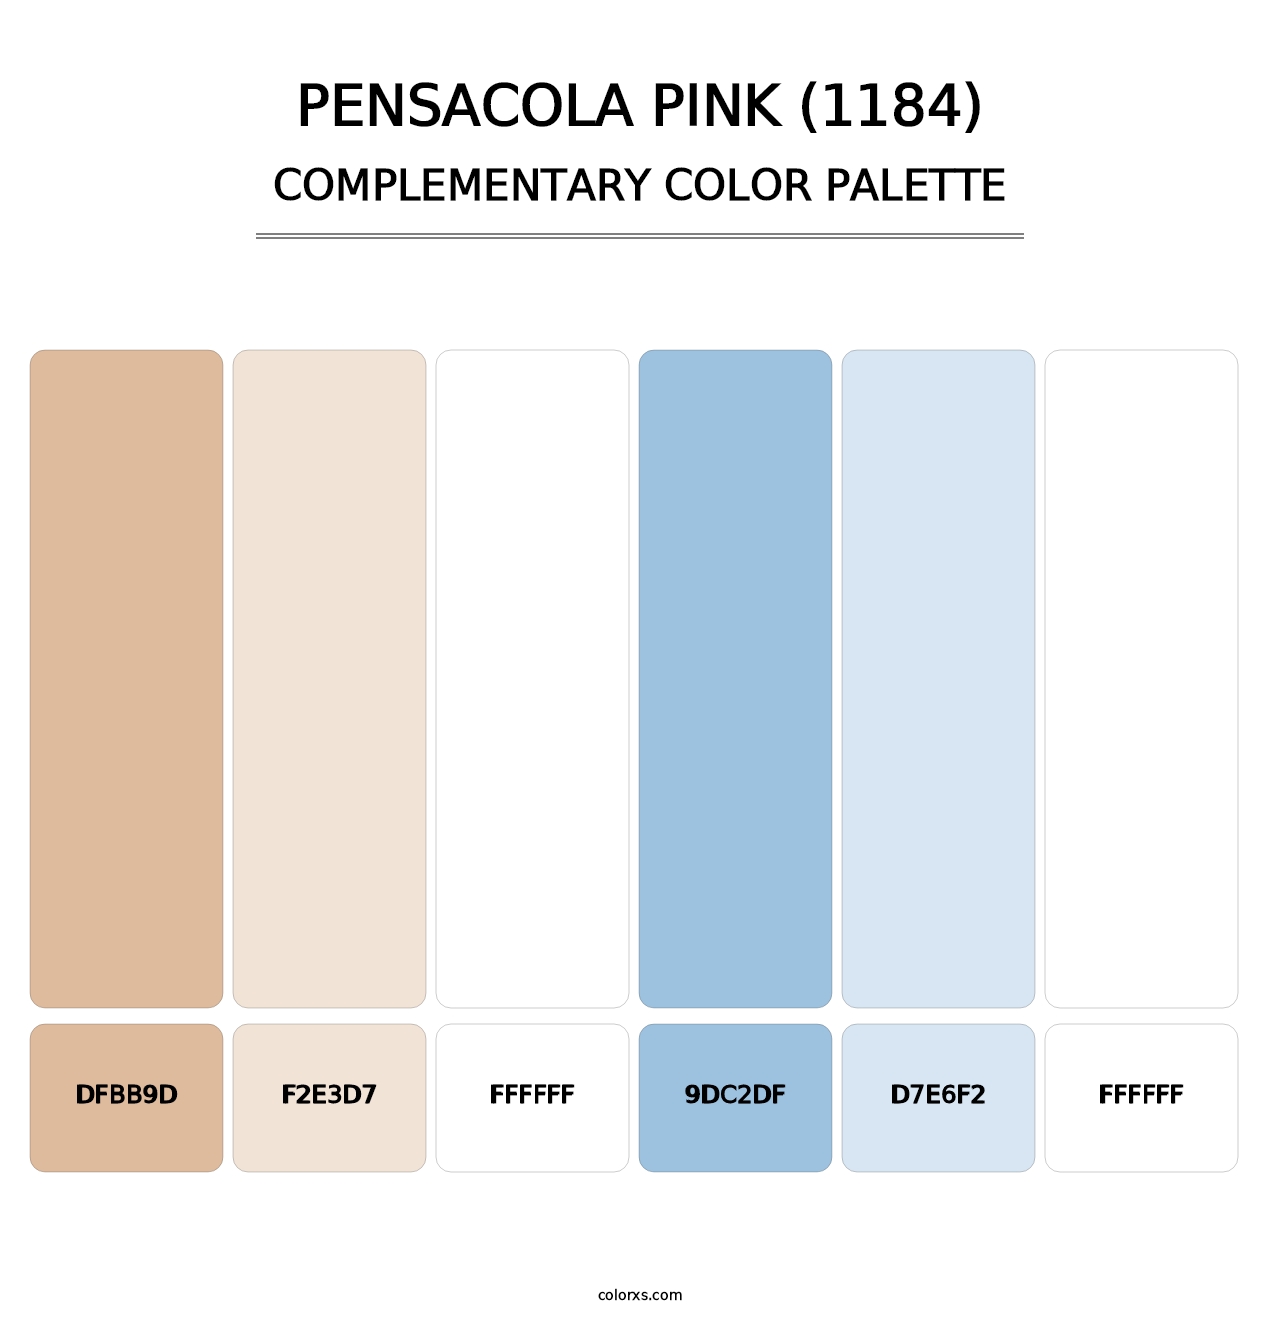 Pensacola Pink (1184) - Complementary Color Palette